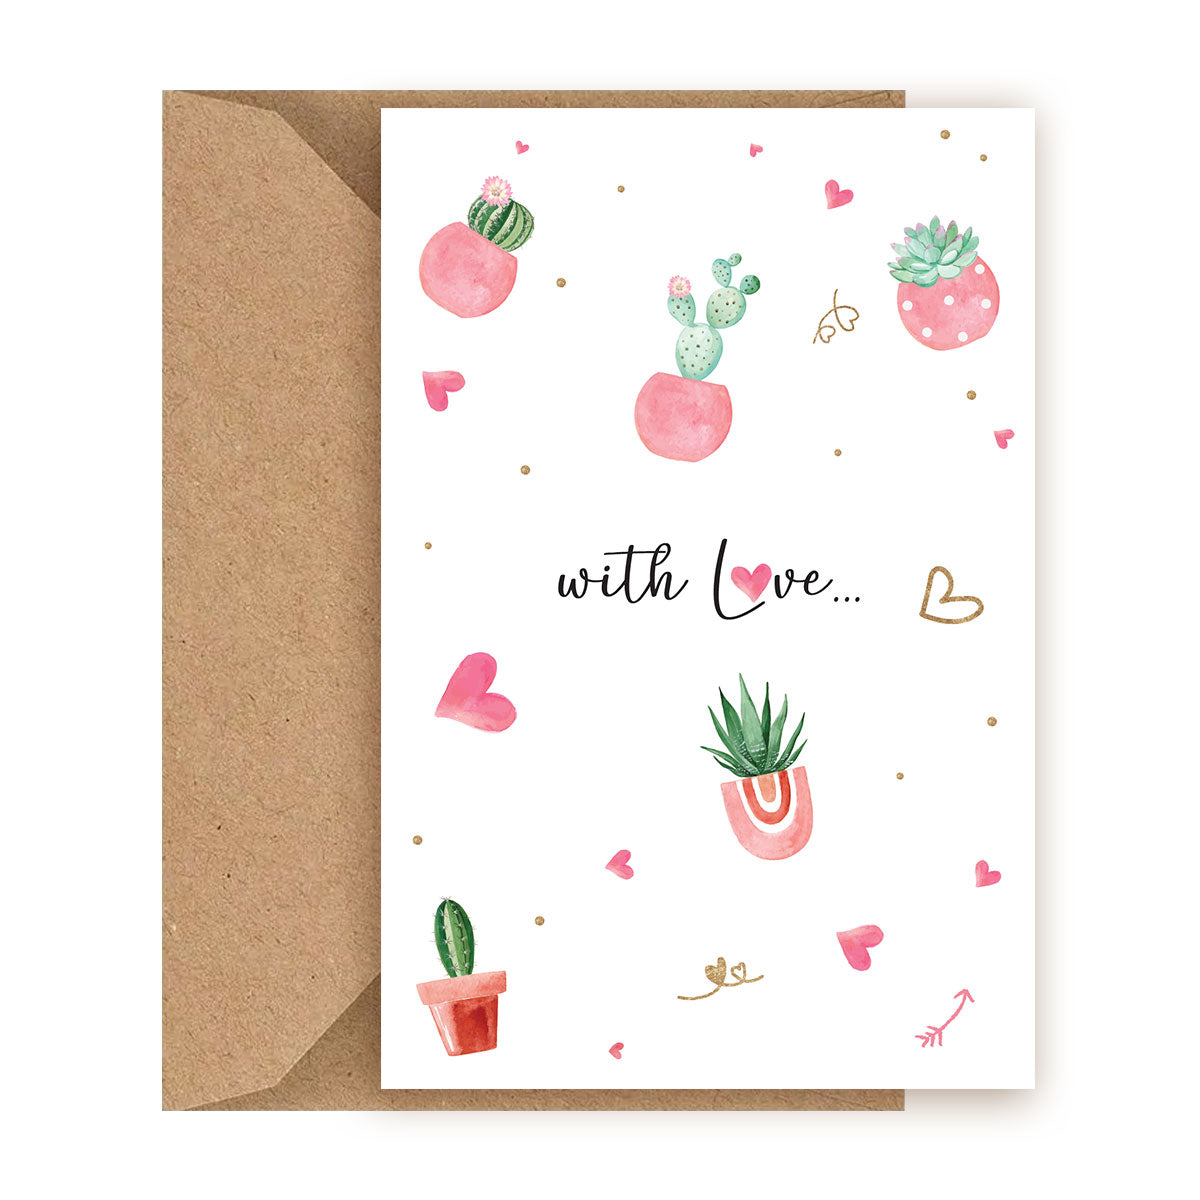 With Love Card, Succulent Card for sale, Cactus Greeting Card, Succulents Greeting Card, Succulents Gift Ideas